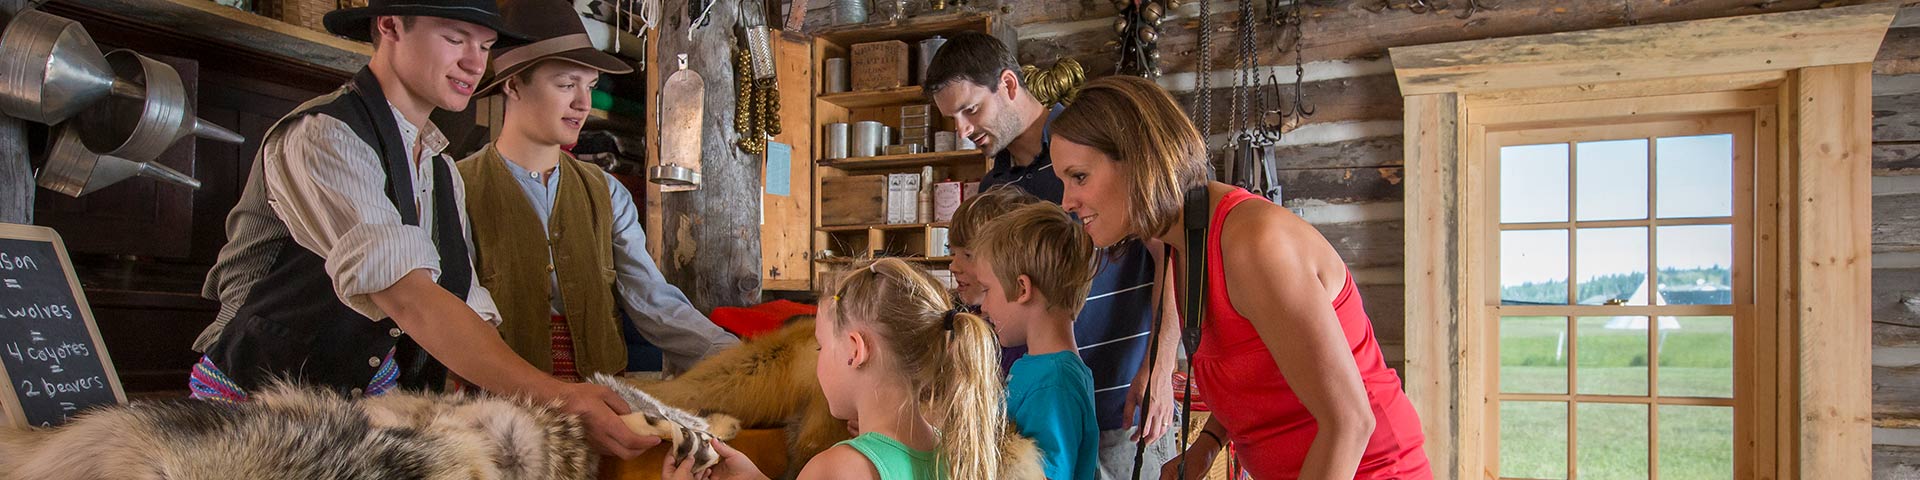 A family checking out the wares in the Métis trading cabin with the help of a couple of costumed interpreters at Fort Walsh National Historic Site.